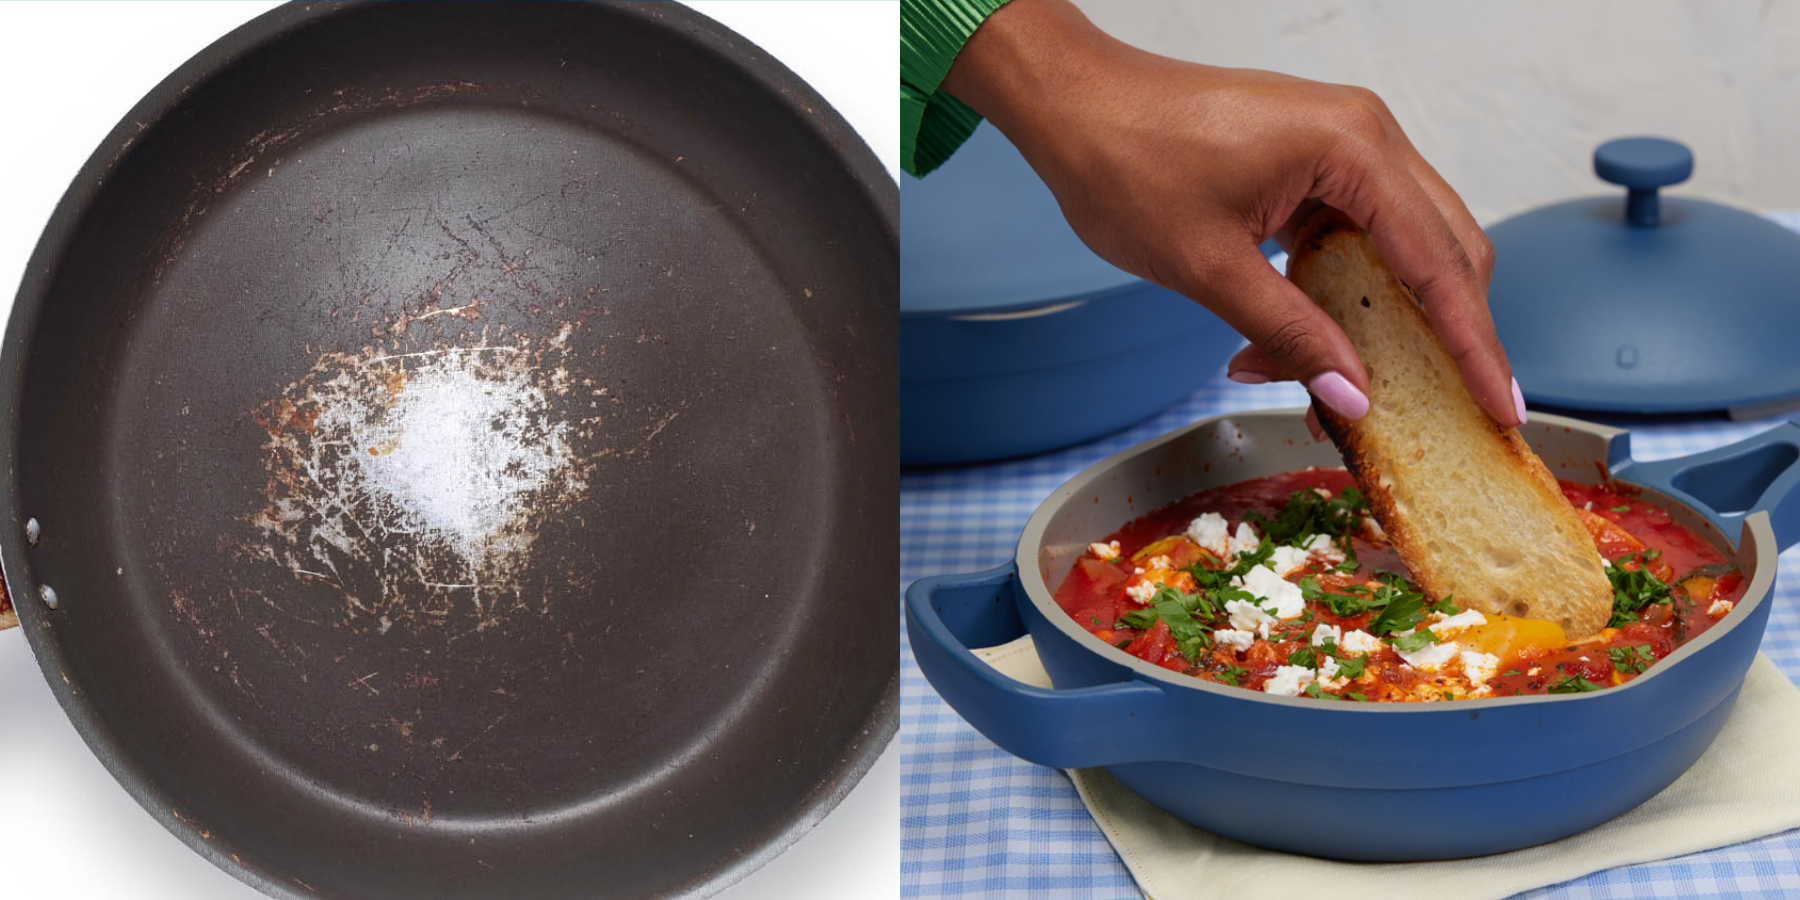 Stop Using Cooking Spray in Your Nonstick Pans